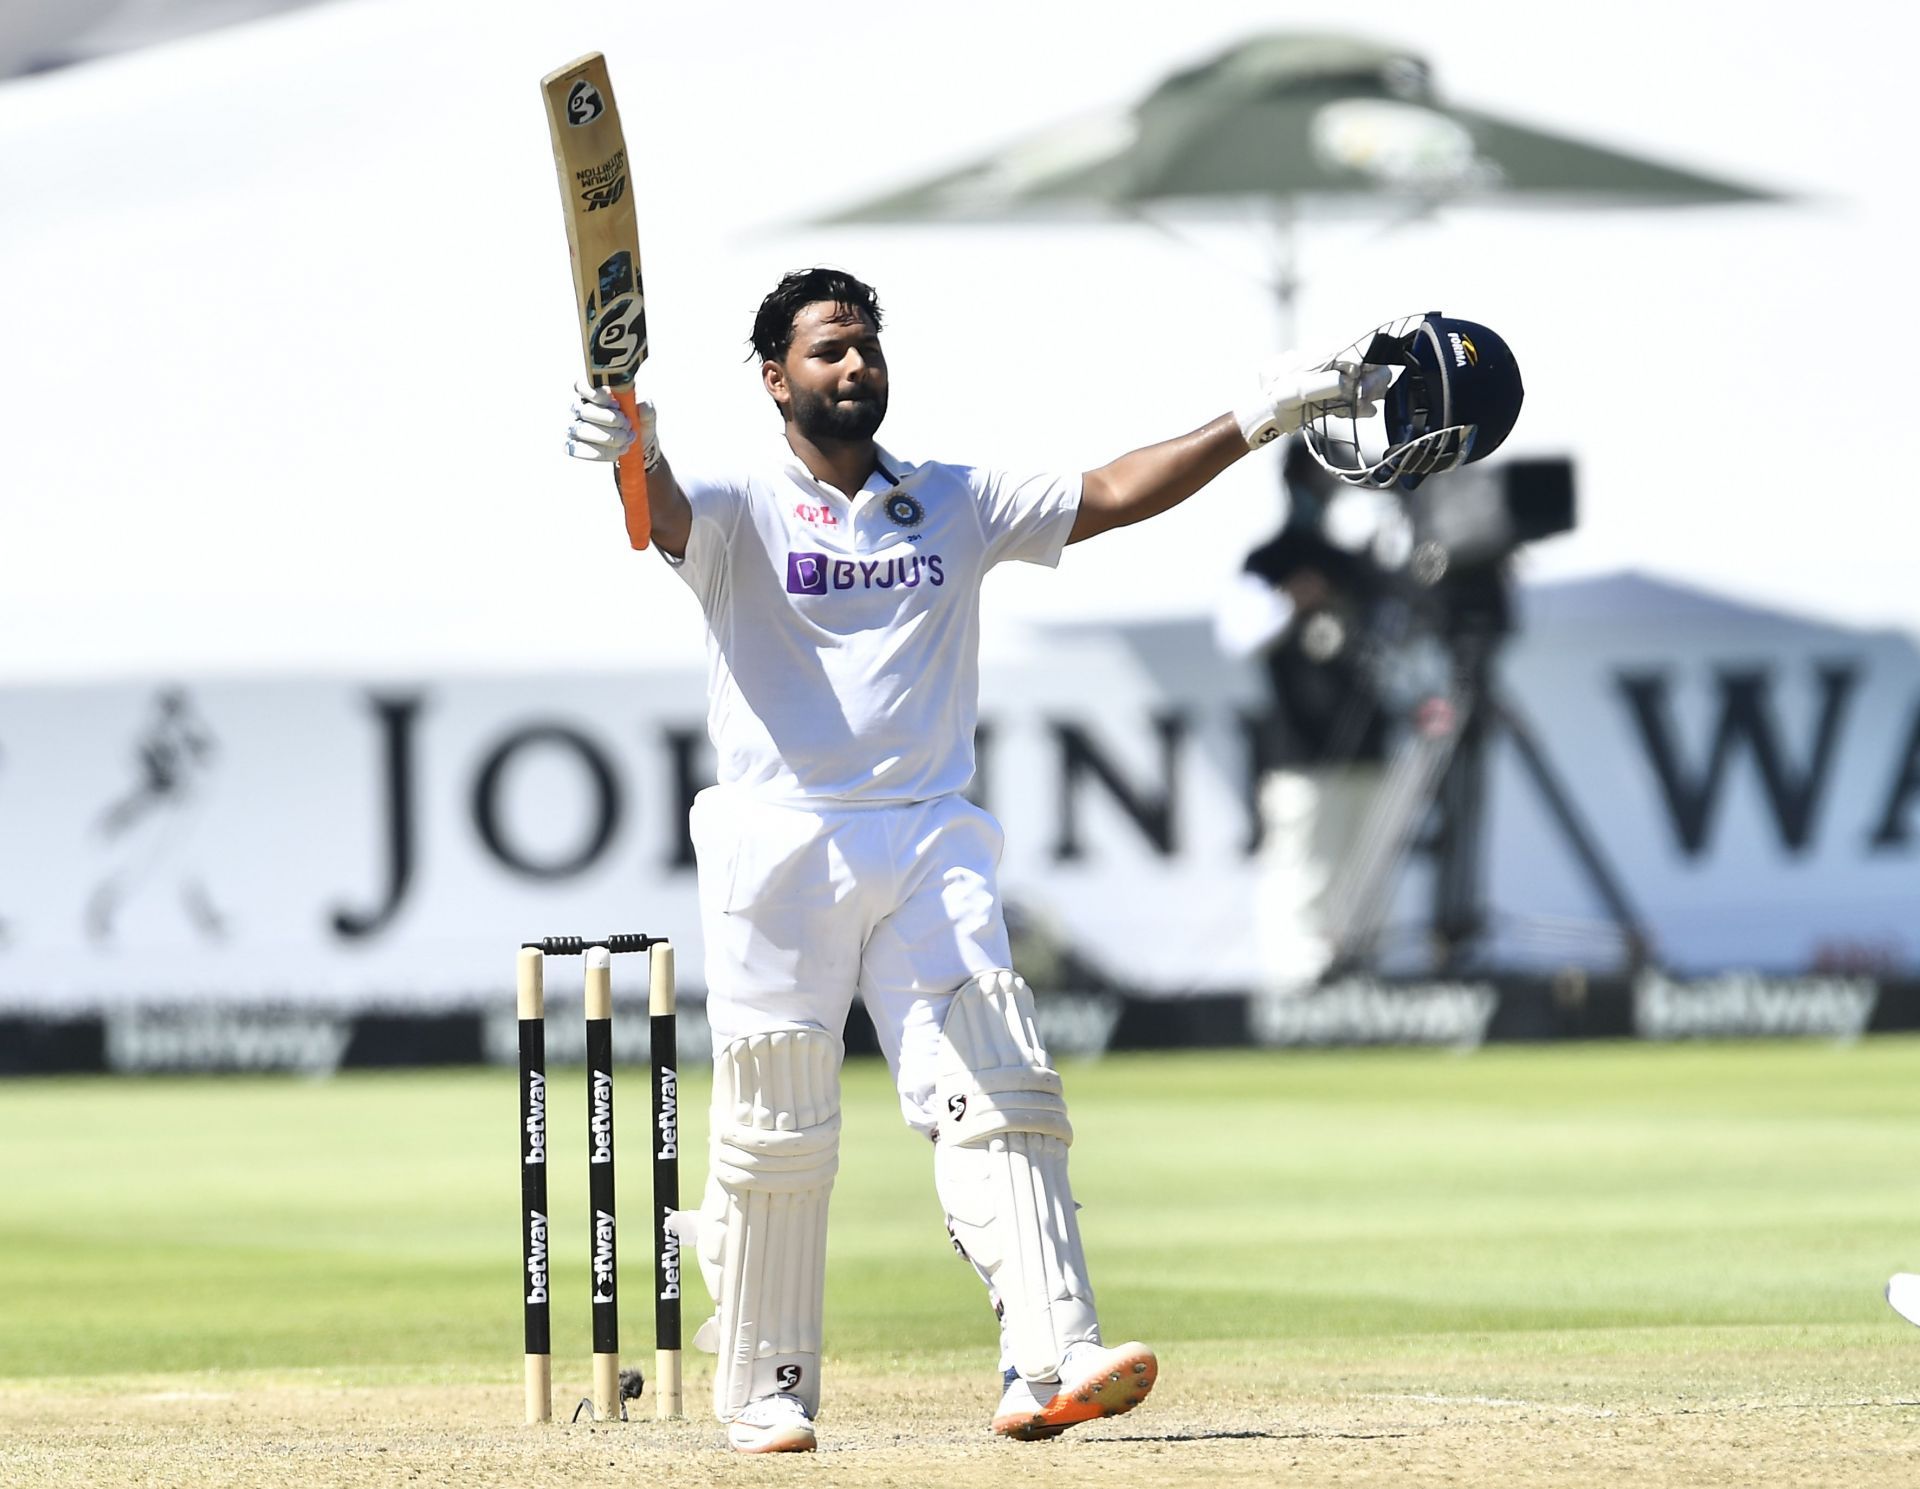 Rishabh Pant dominated the South African bowlers in Cape Town